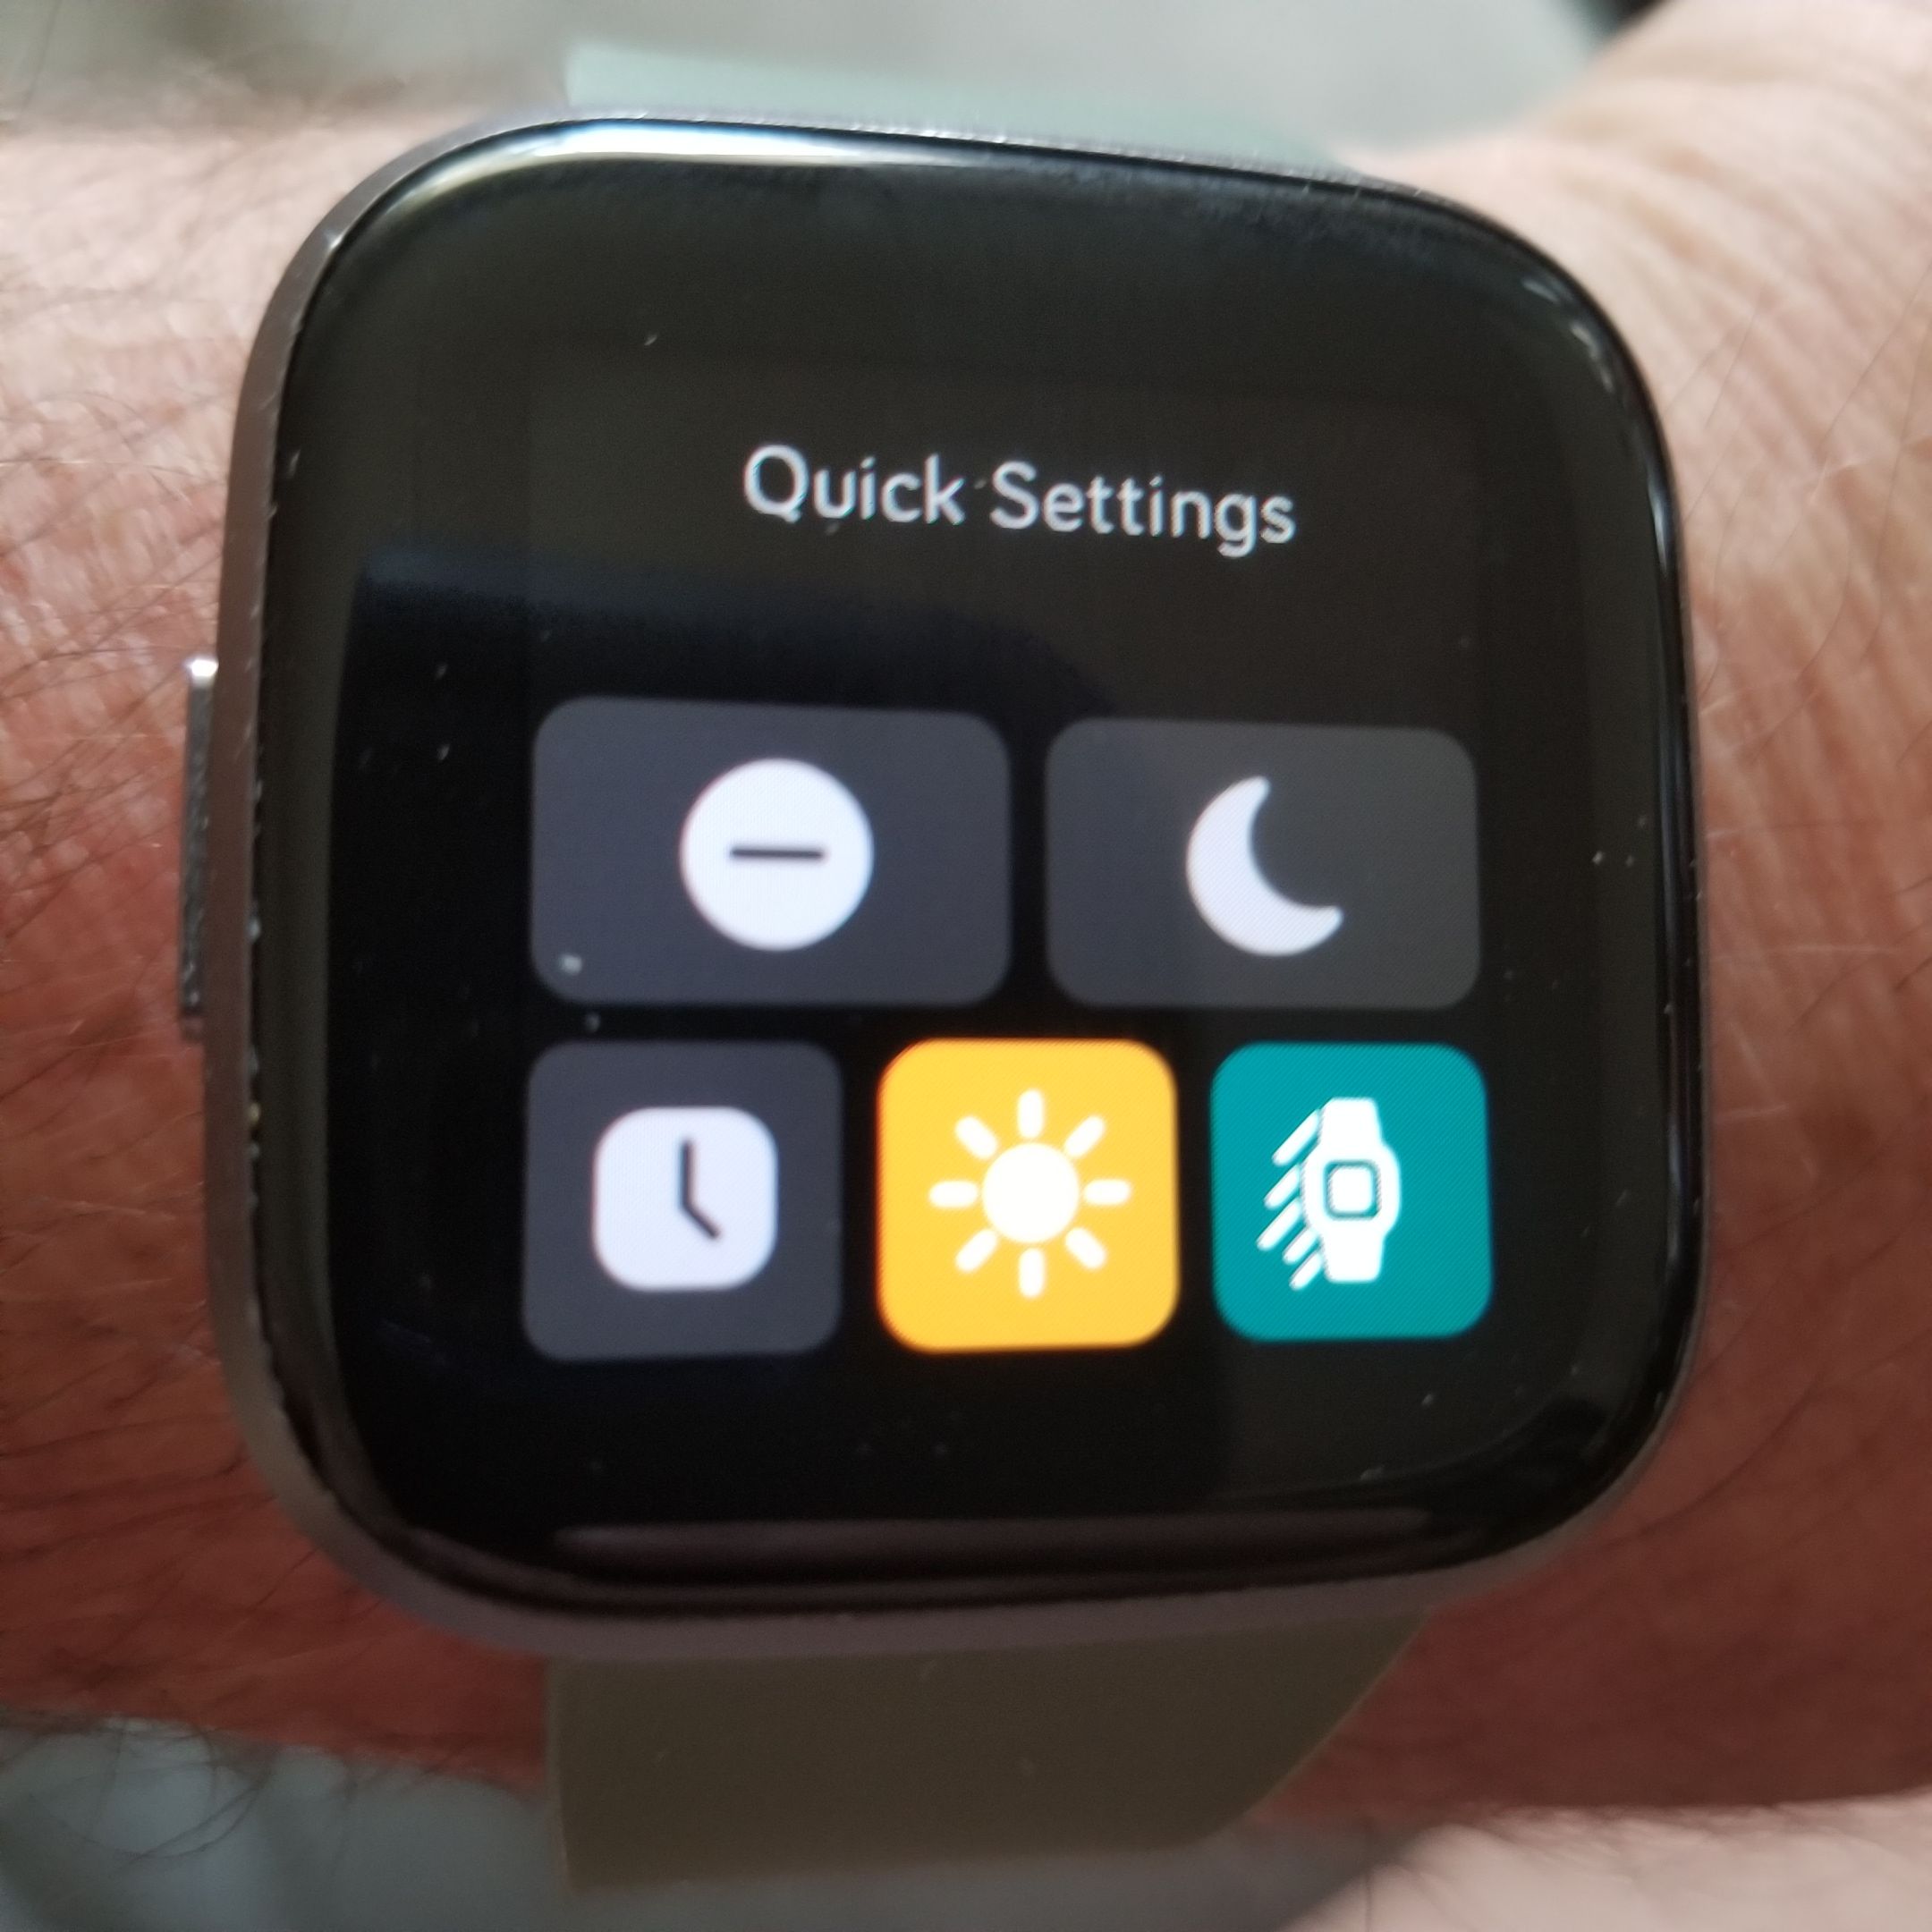 Quick View Settings - turn off - Fitbit 